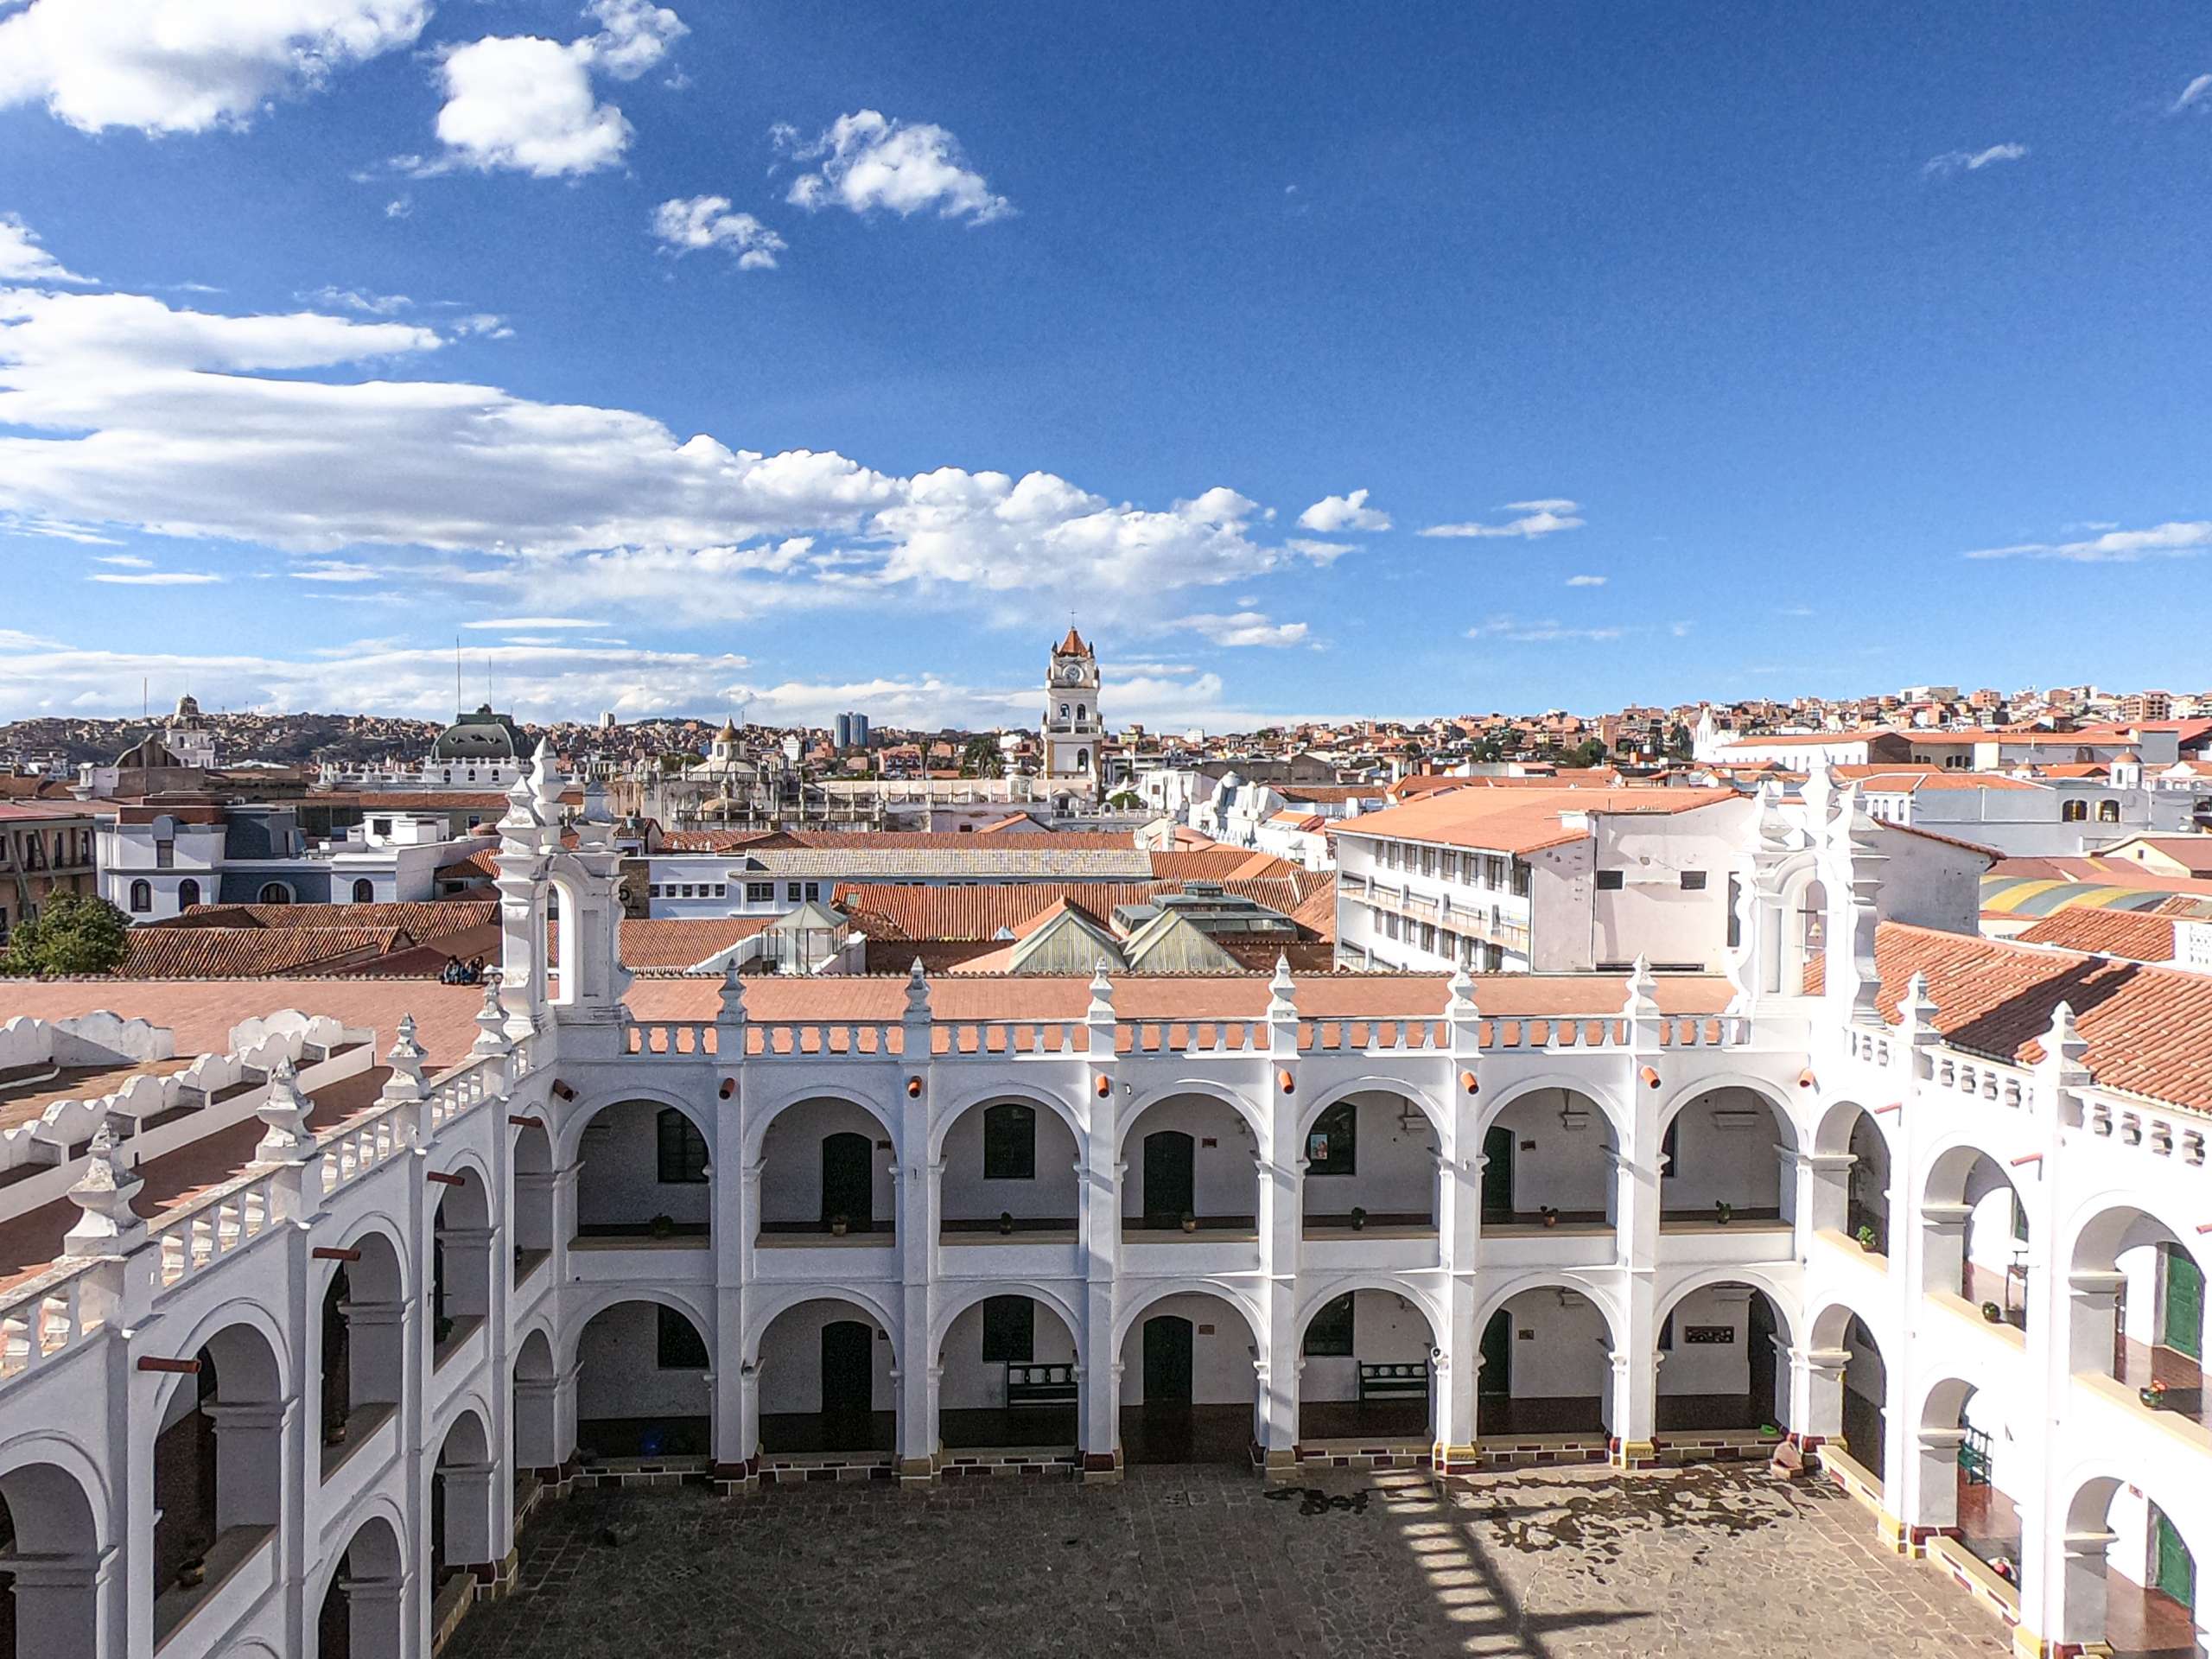 4 things not to miss during your trip to Sucre